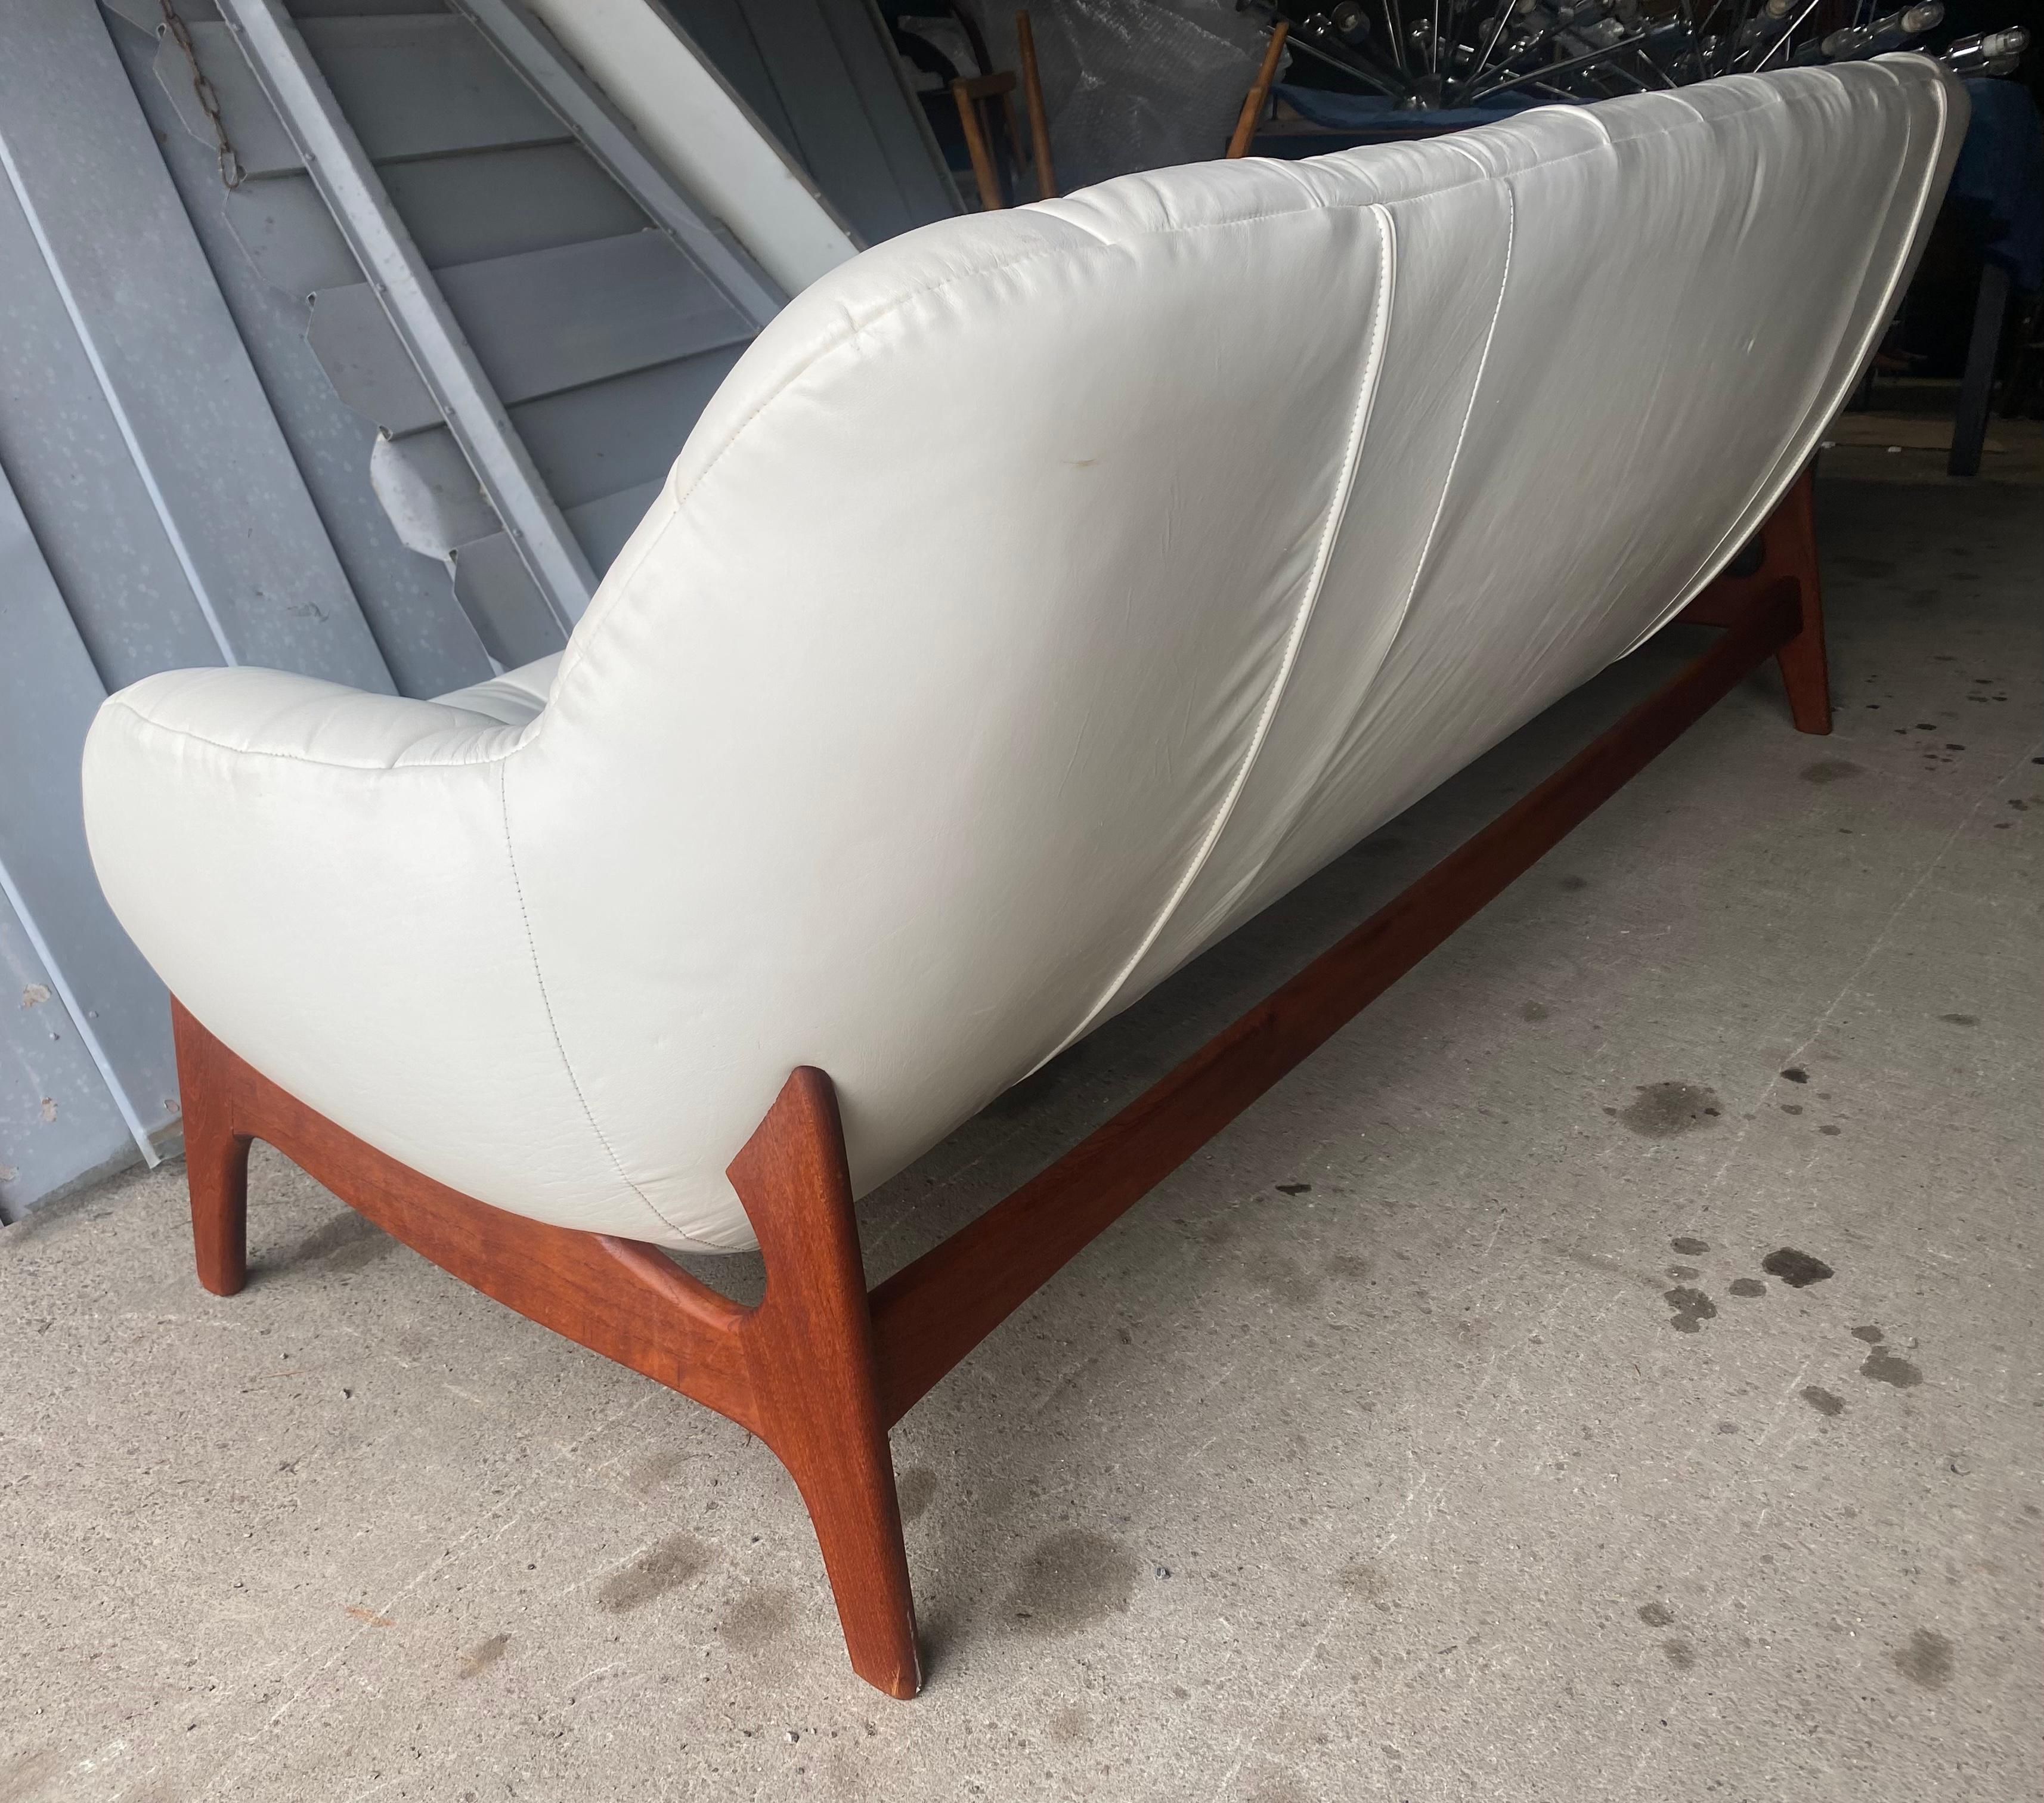 Vintage teak floating egg sofa by R. Huber & Co.,,rare tufted white leather ,,
In the world of Mid Century Design,,R.Huber stands out as Canada's hottest companies right now, Their 